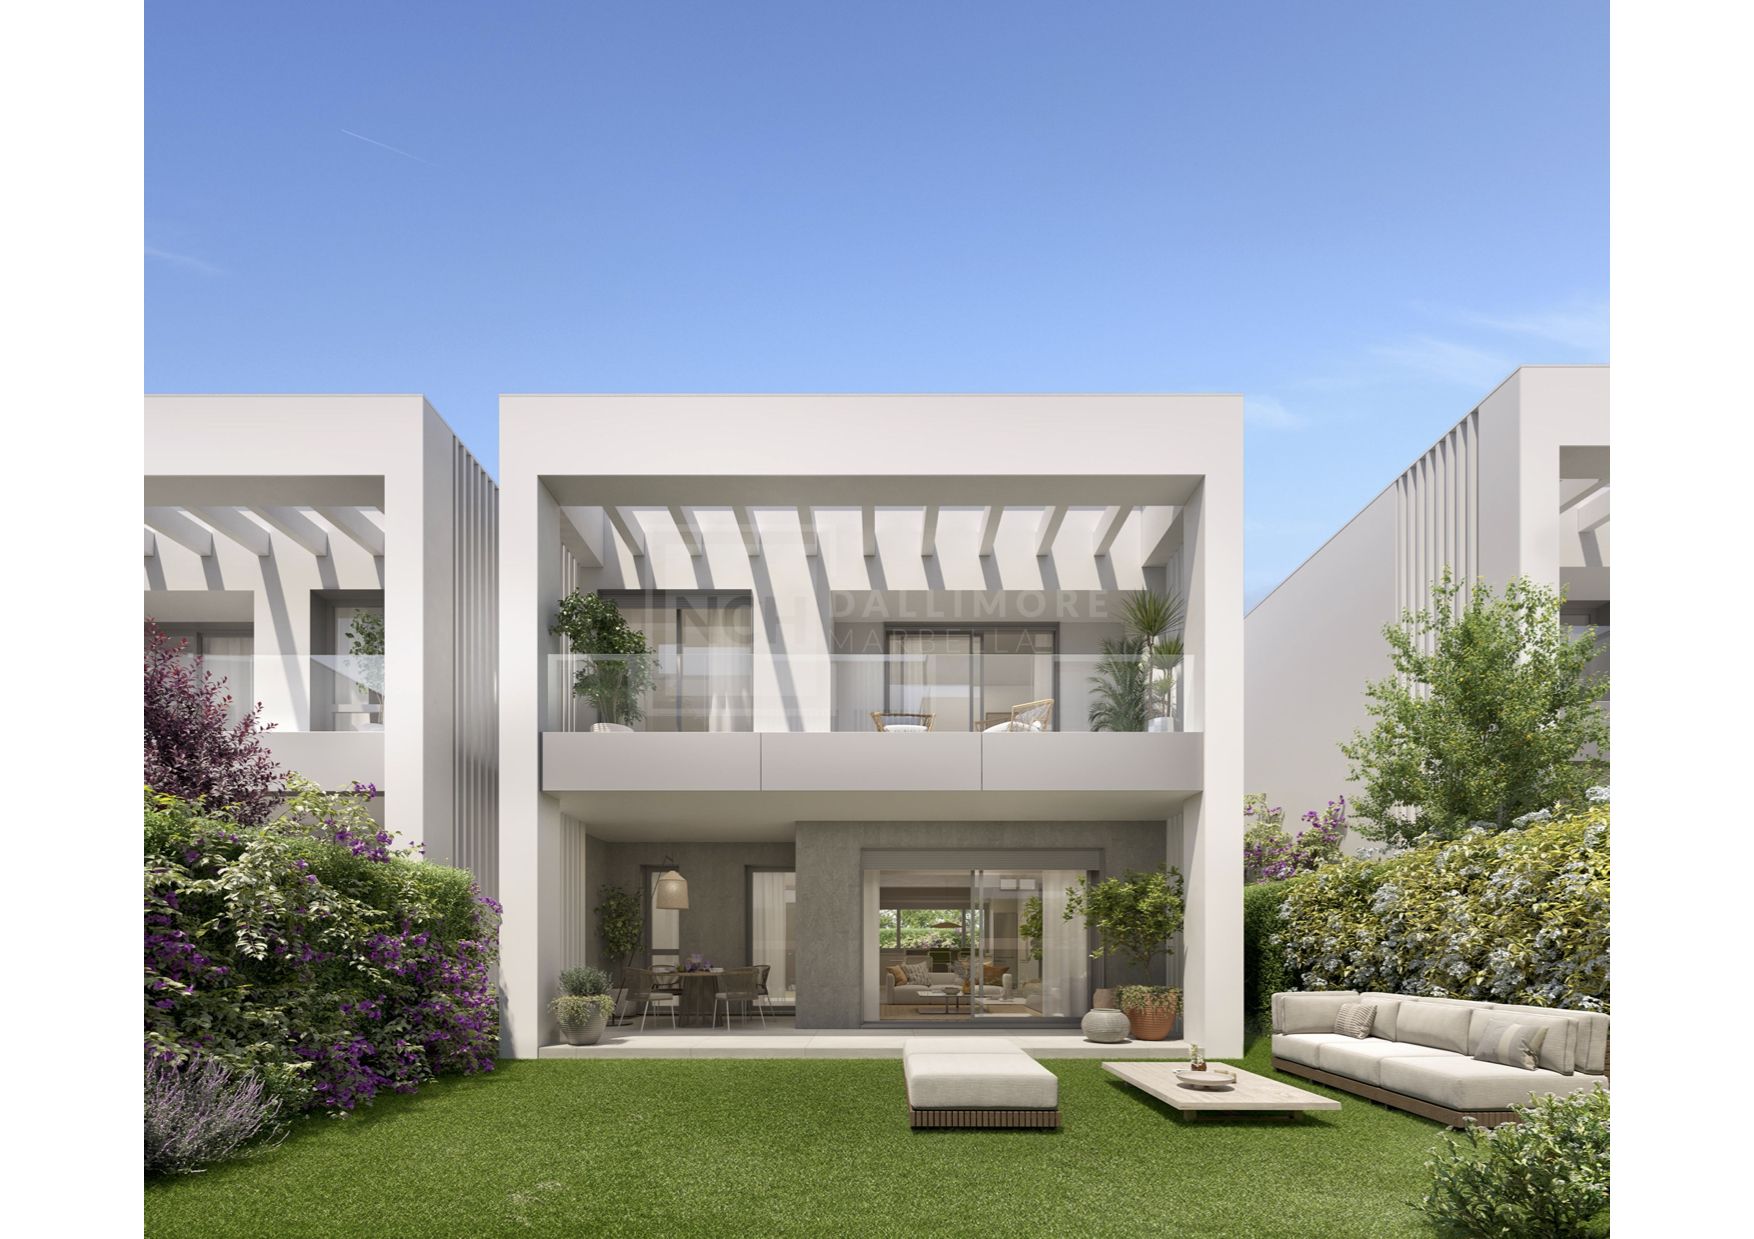 BRAND NEW STYLISH 3-BEDROOM TOWNHOUSE CLOSE TO BEACH EAST MARBELLA